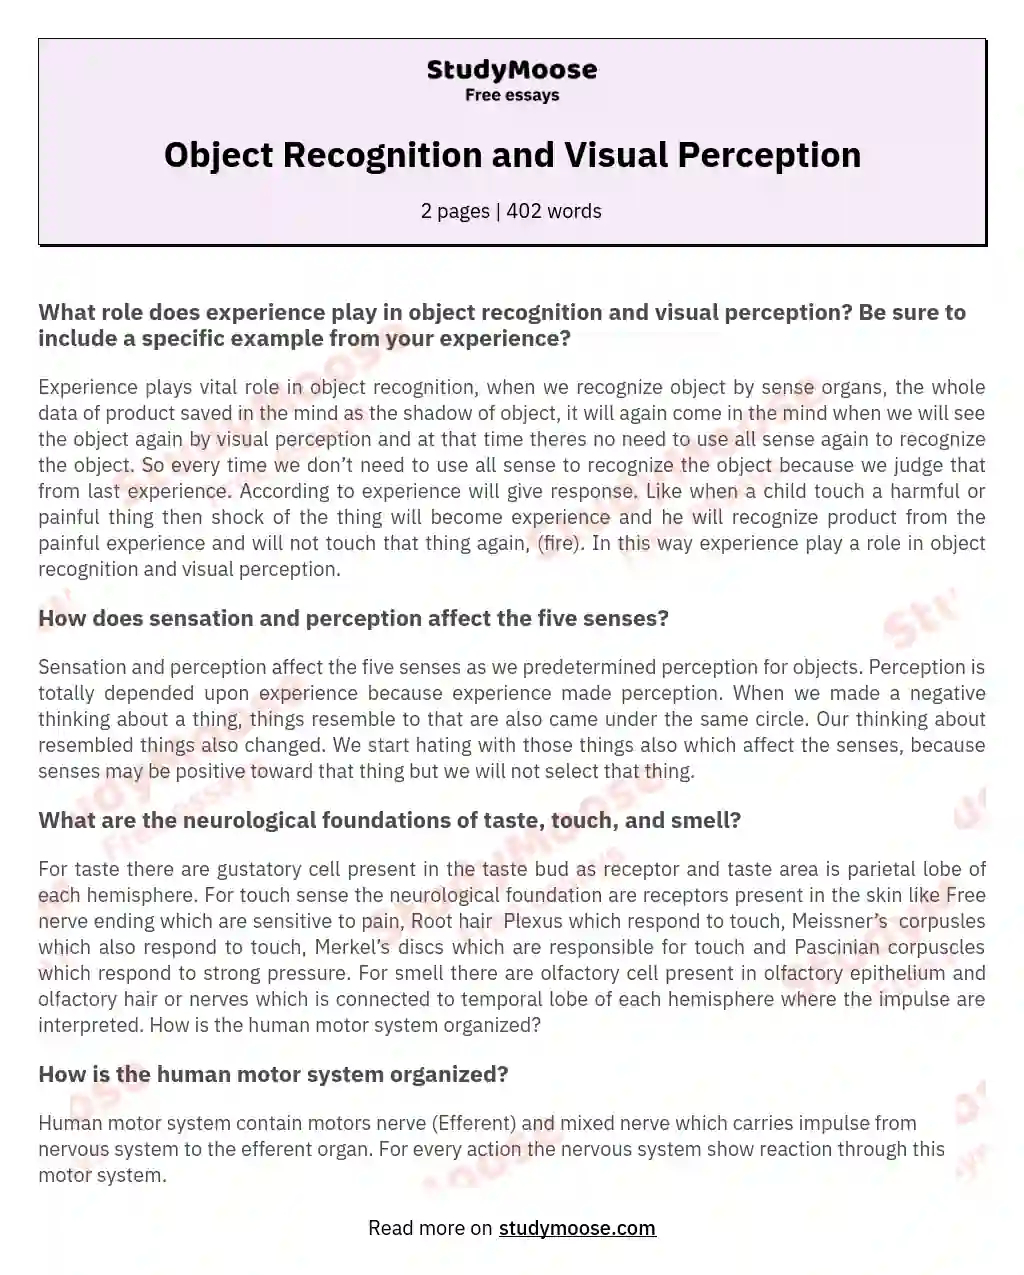 Object Recognition and Visual Perception essay